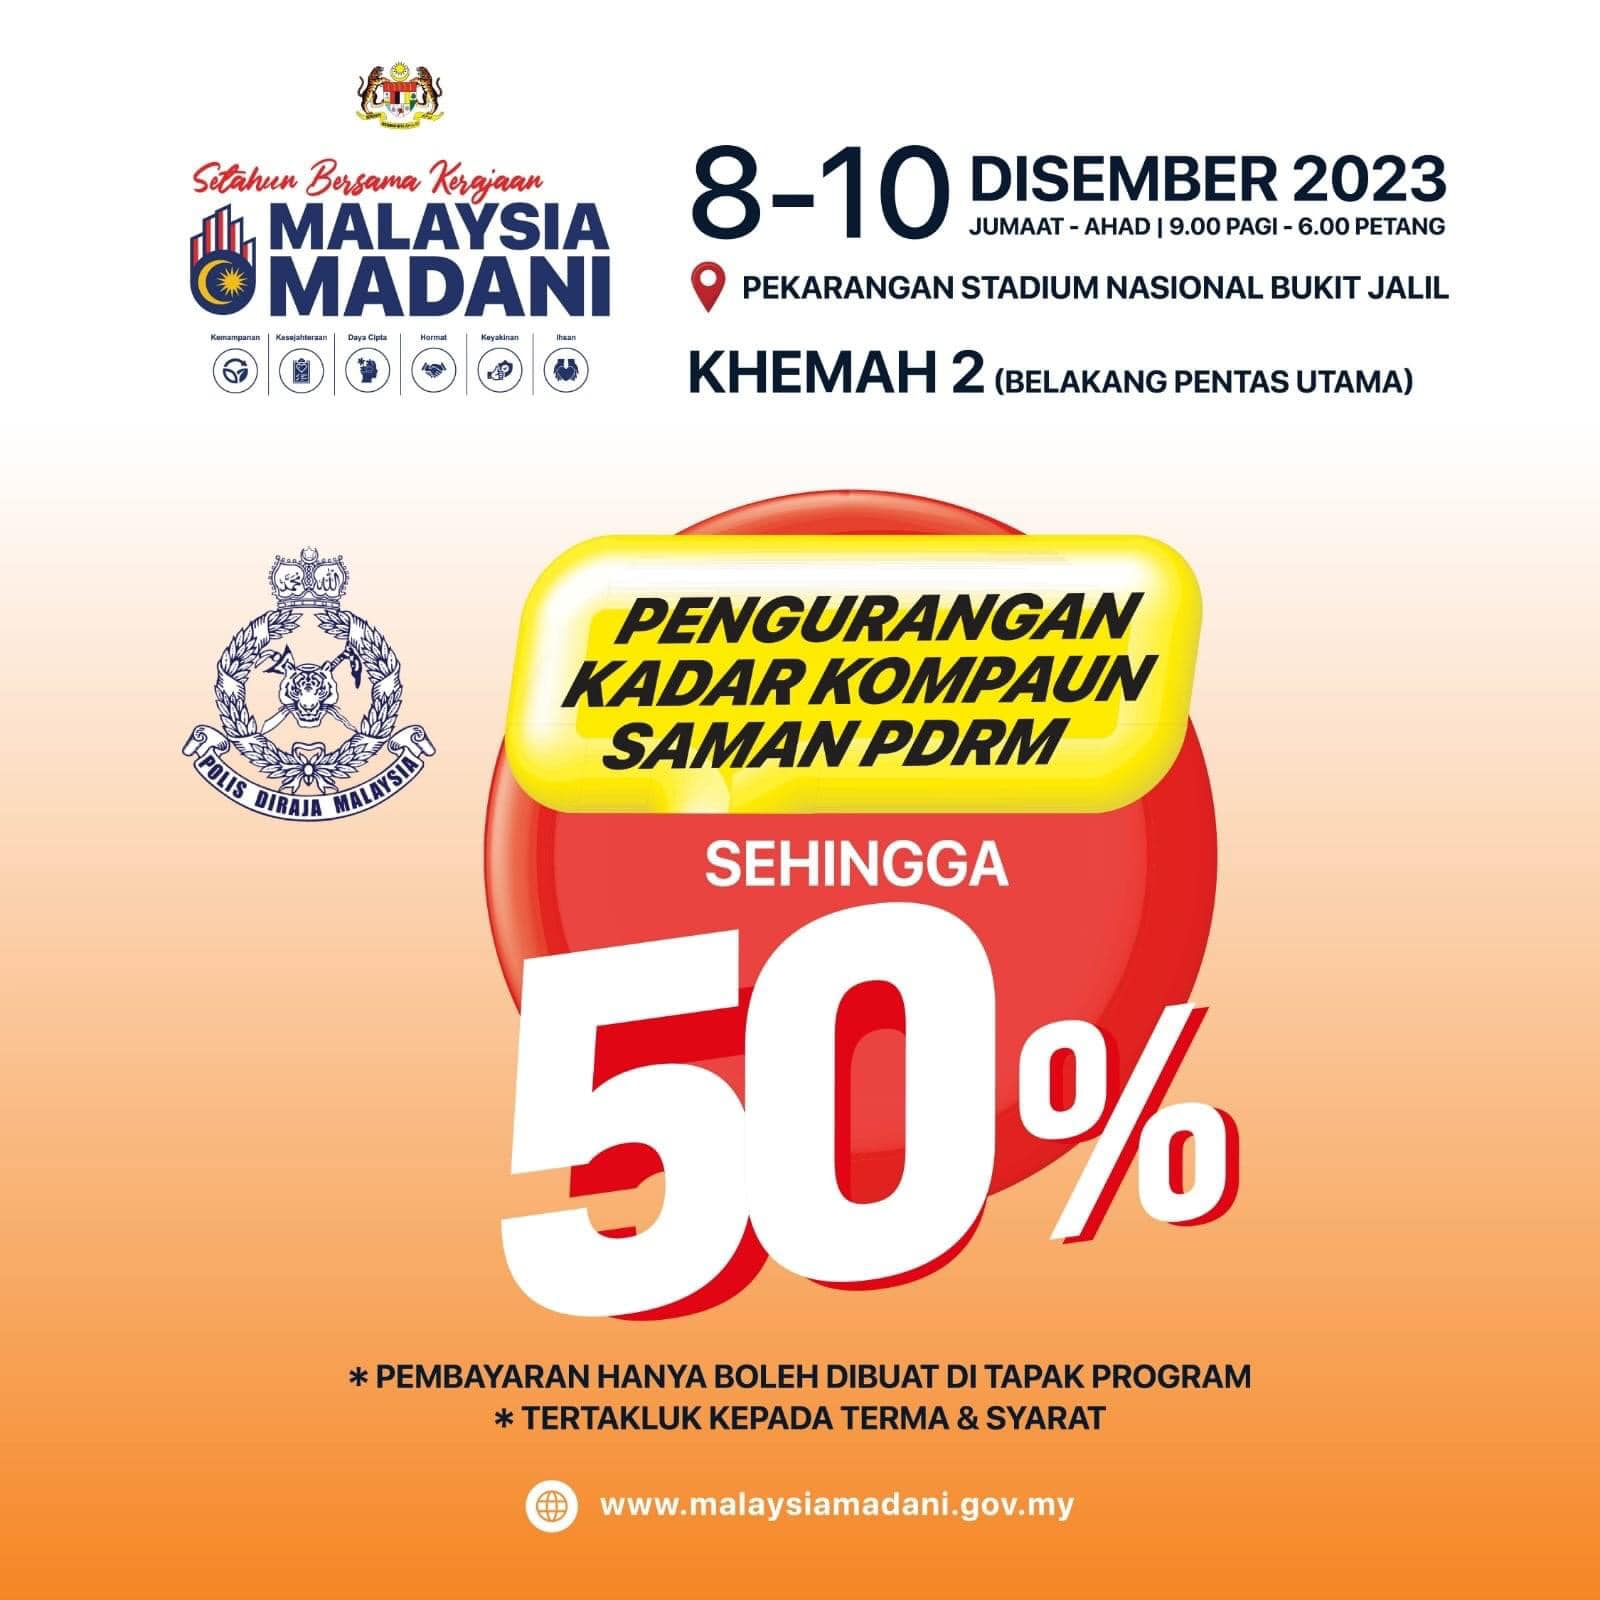 50% discount on traffic summonses at bukit jalil national stadium from dec 8-10